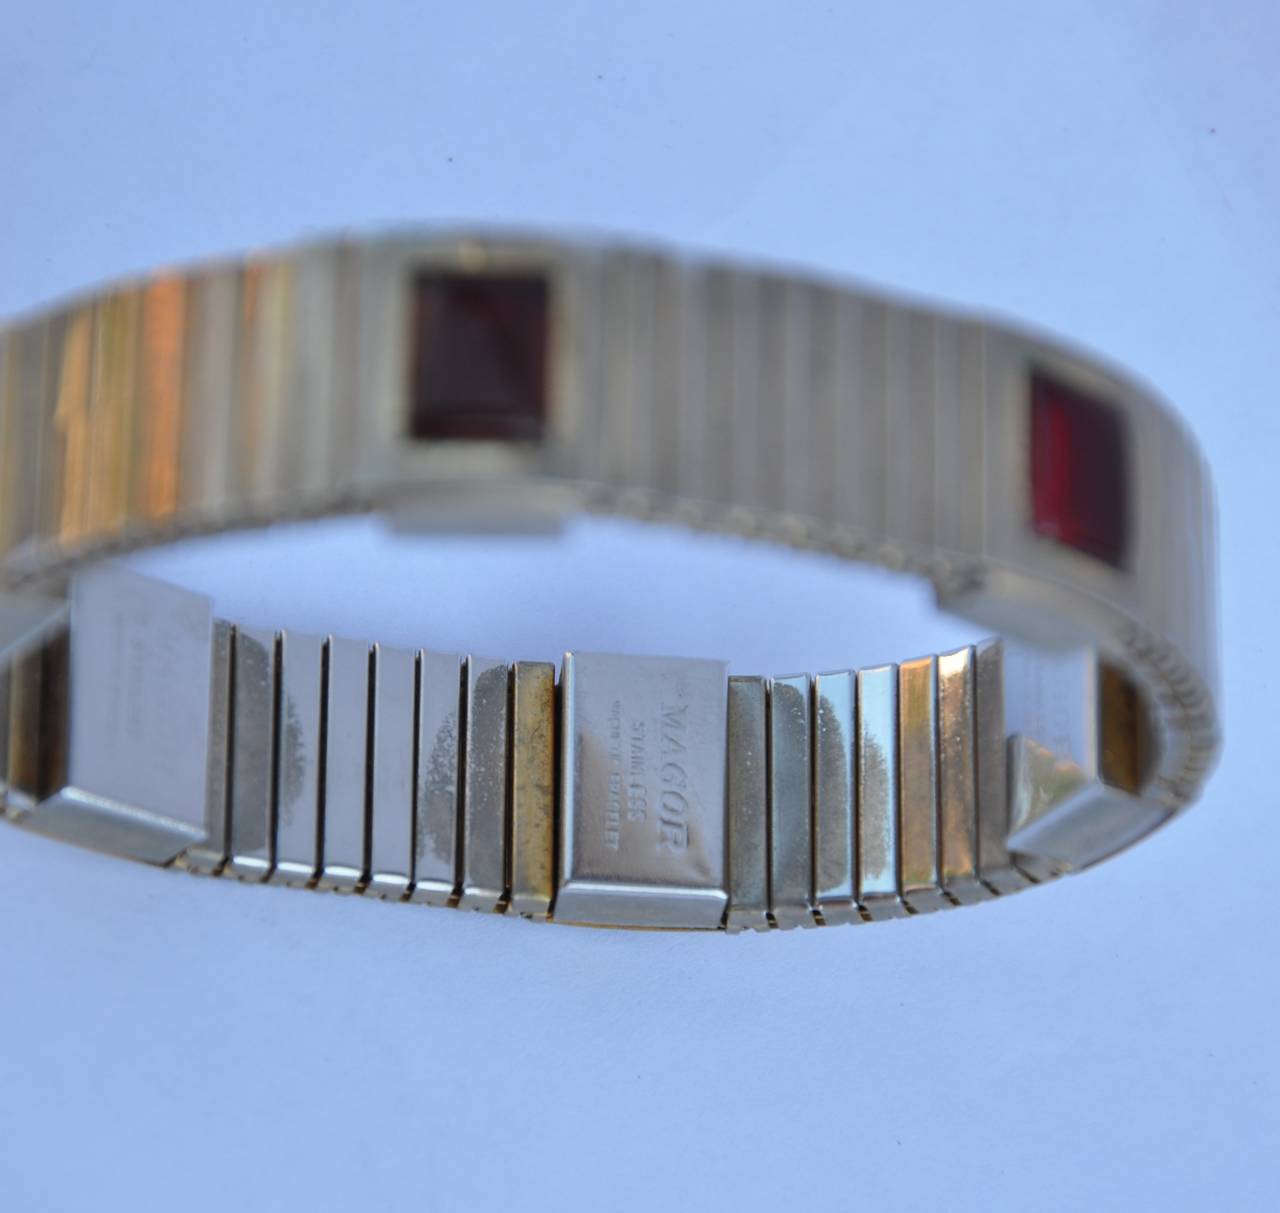 Magor stainless with multi ruby resin magnetic bracelet is adjustable. Without wearing, the circumference measures 8 1/2", width is 5/8", depth is 2/8".